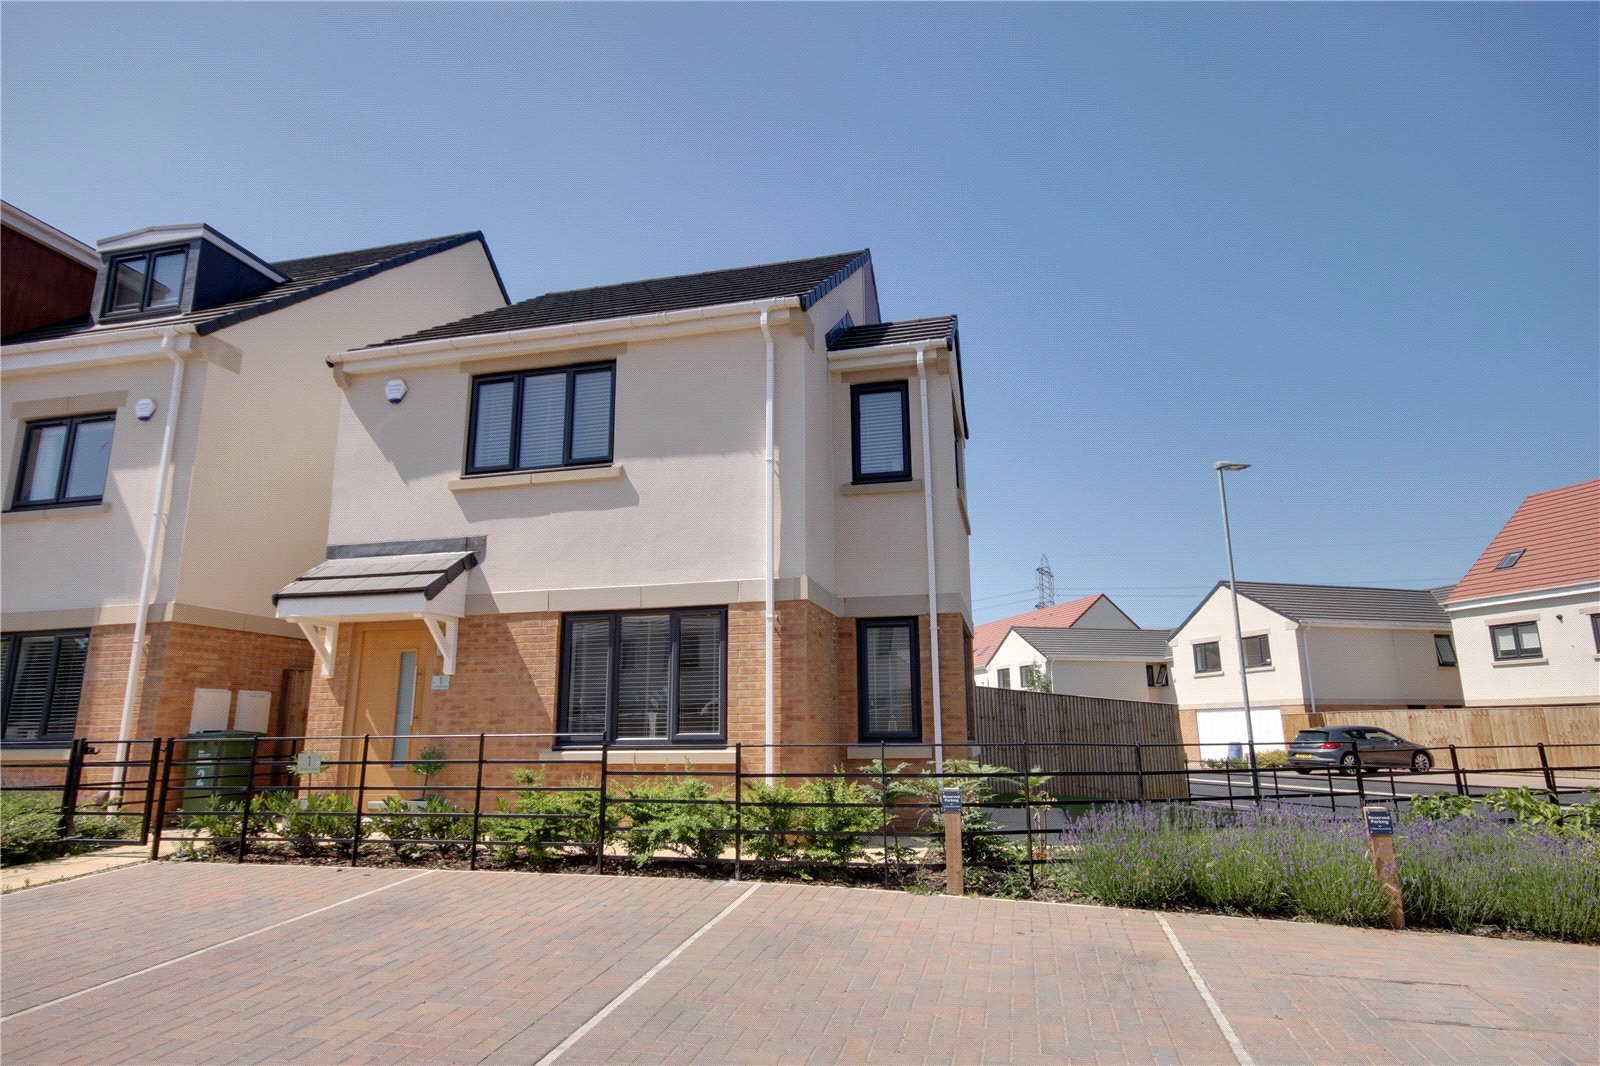 2 bed house for sale in Low Crook Close, Eaglescliffe - Property Image 1